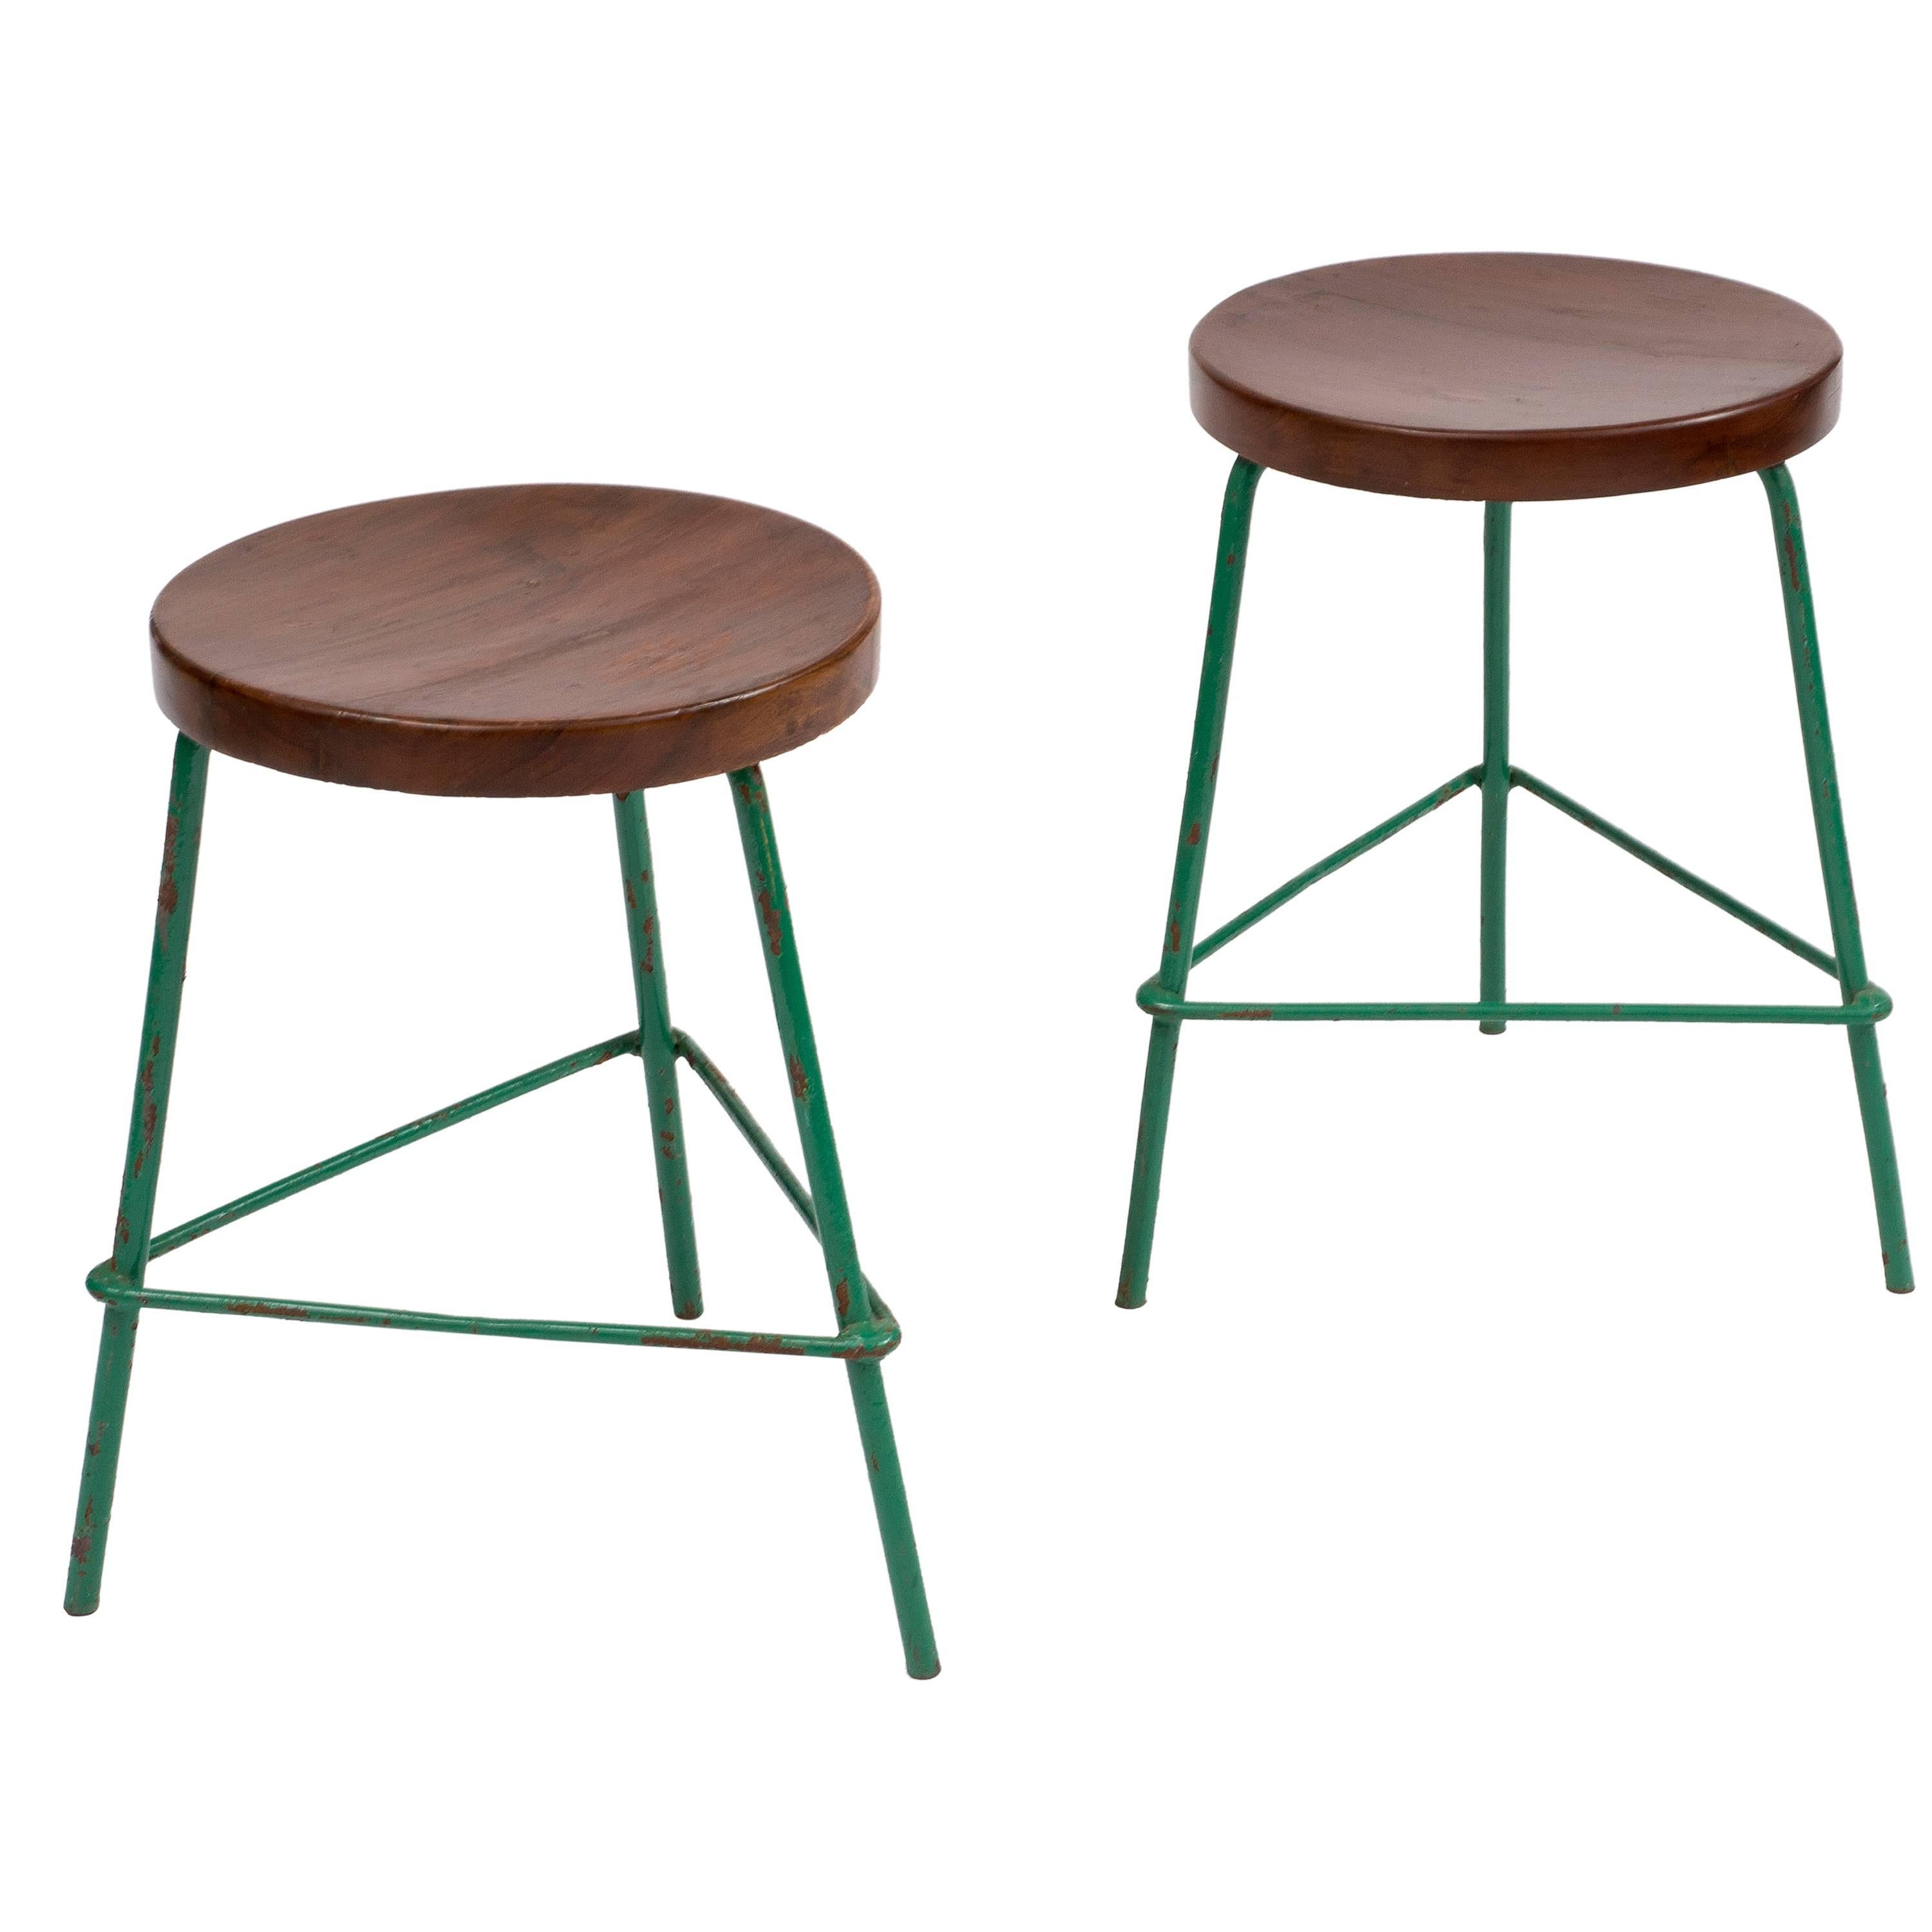 Pair of Stools by Pierre Jeanneret for College of Architecture, Chandigarh